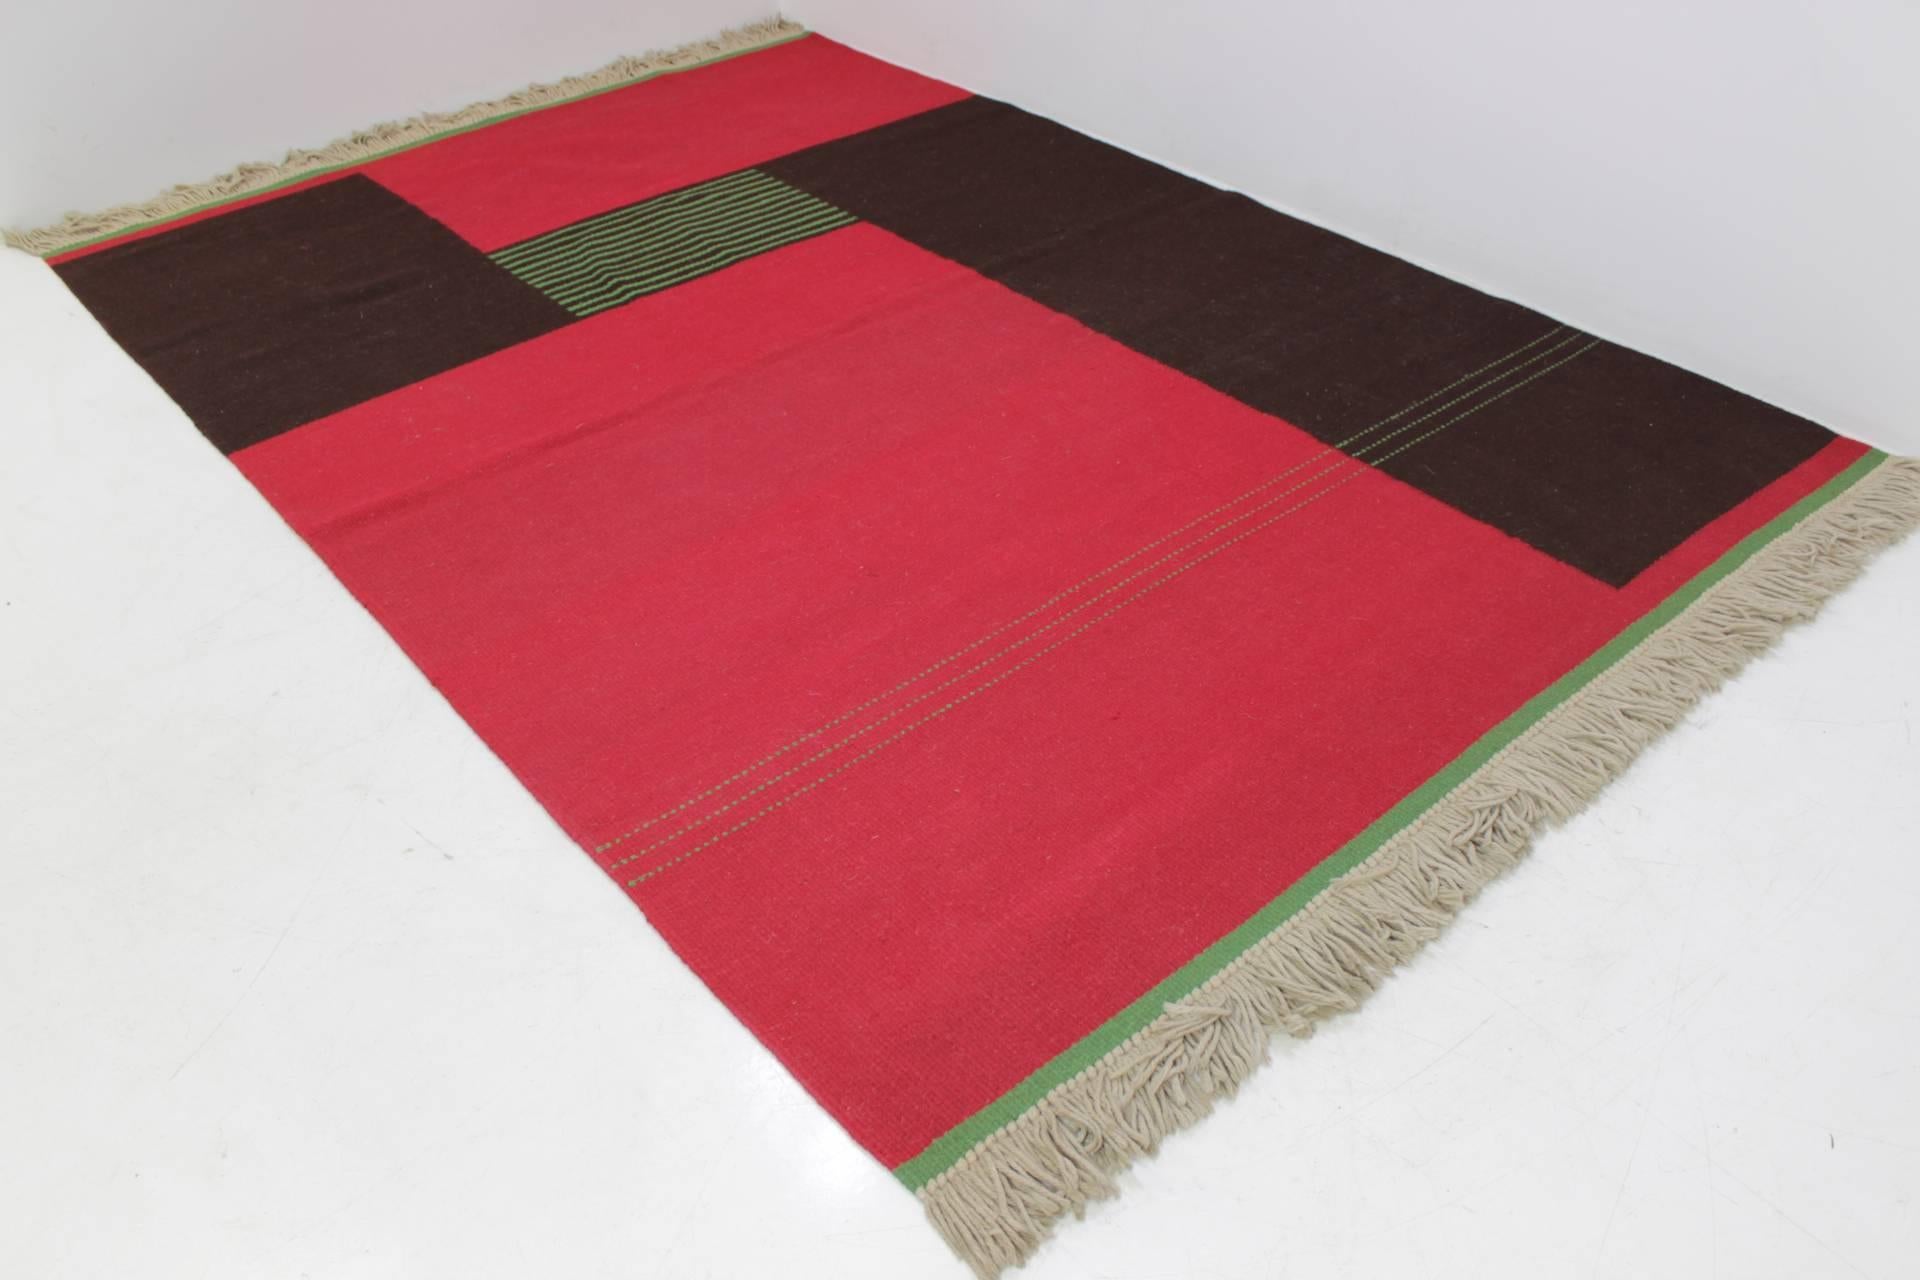 - Czechoslovakia
- Kilim
- double-sided, bright colors
- good condition, nice and complete fringes
- dark brown, pink and green